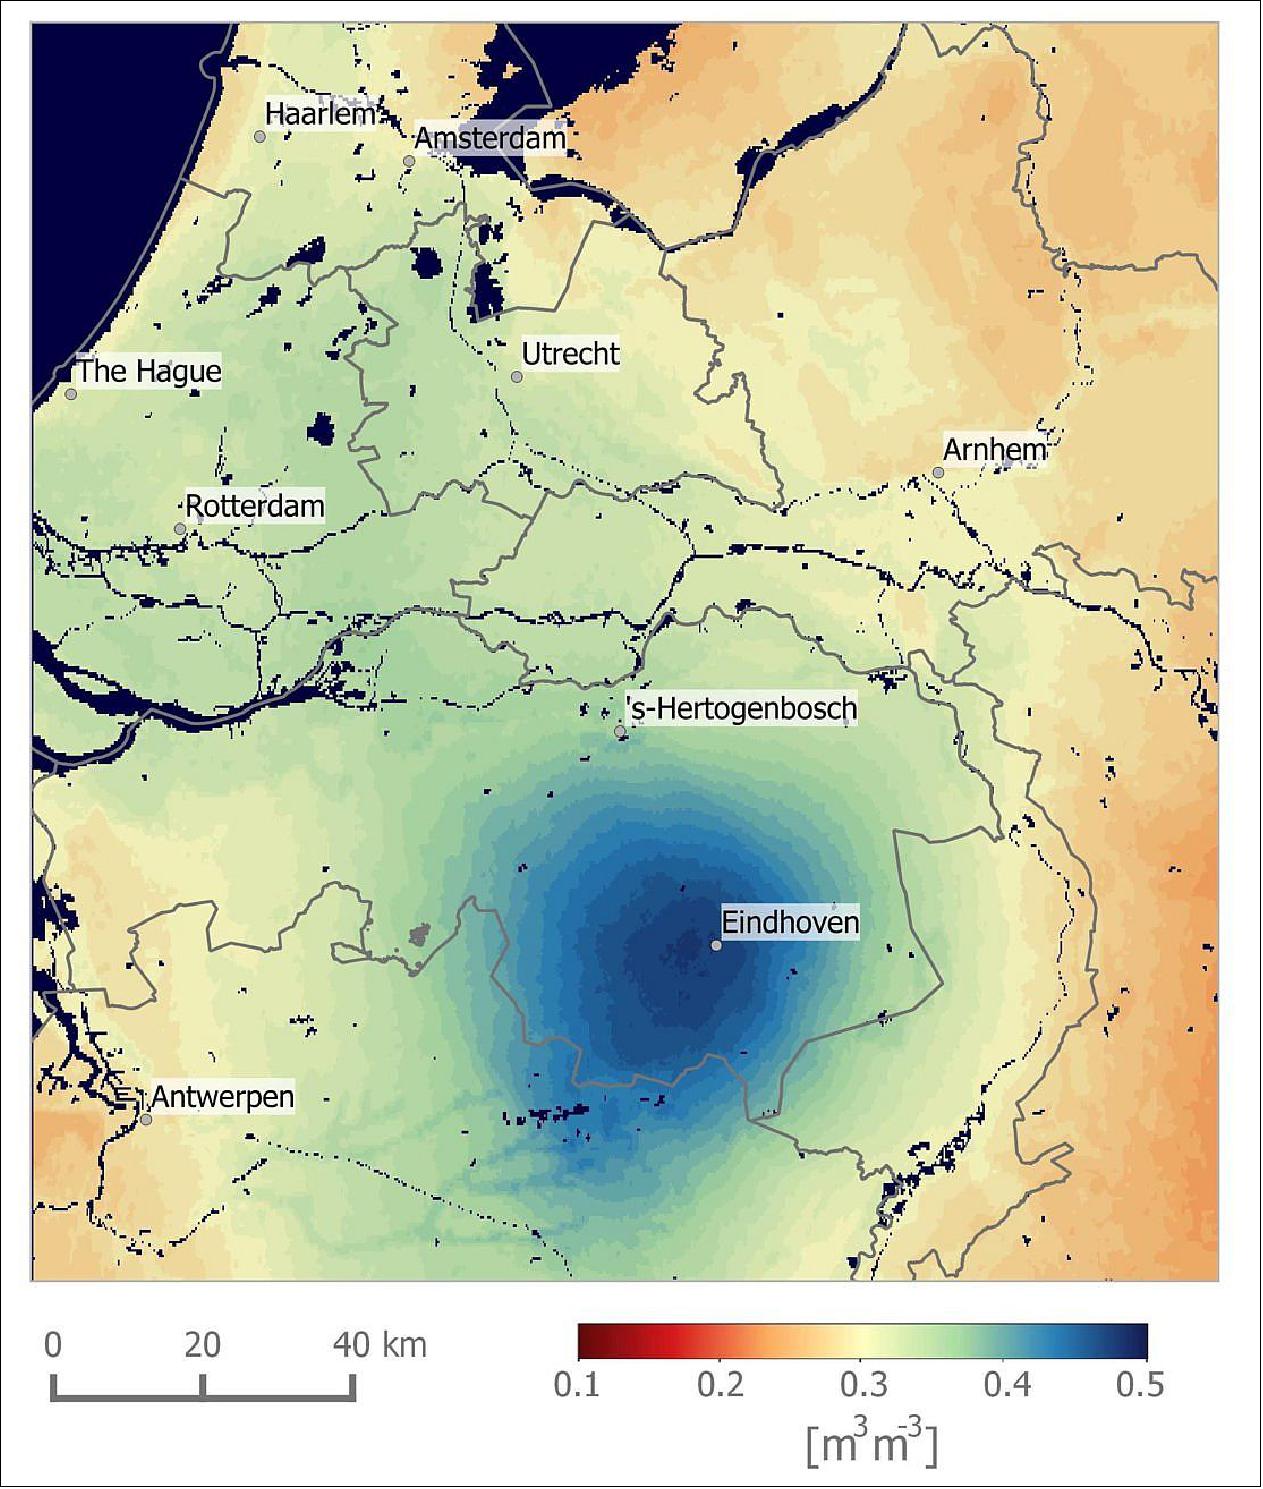 Figure 57: This map, showing wet soils in the south of the Netherlands, is thanks to processing data from different satellites. Since a single satellite cannot provide high-accuracy datasets, high spatial resolution and fast global coverage, combining data different sources allows for data products that are suitable for many practical applications such as flood forecasting. In this case data from SMAP and Sentinel-1 were used (image credit: VanderSat) 63)